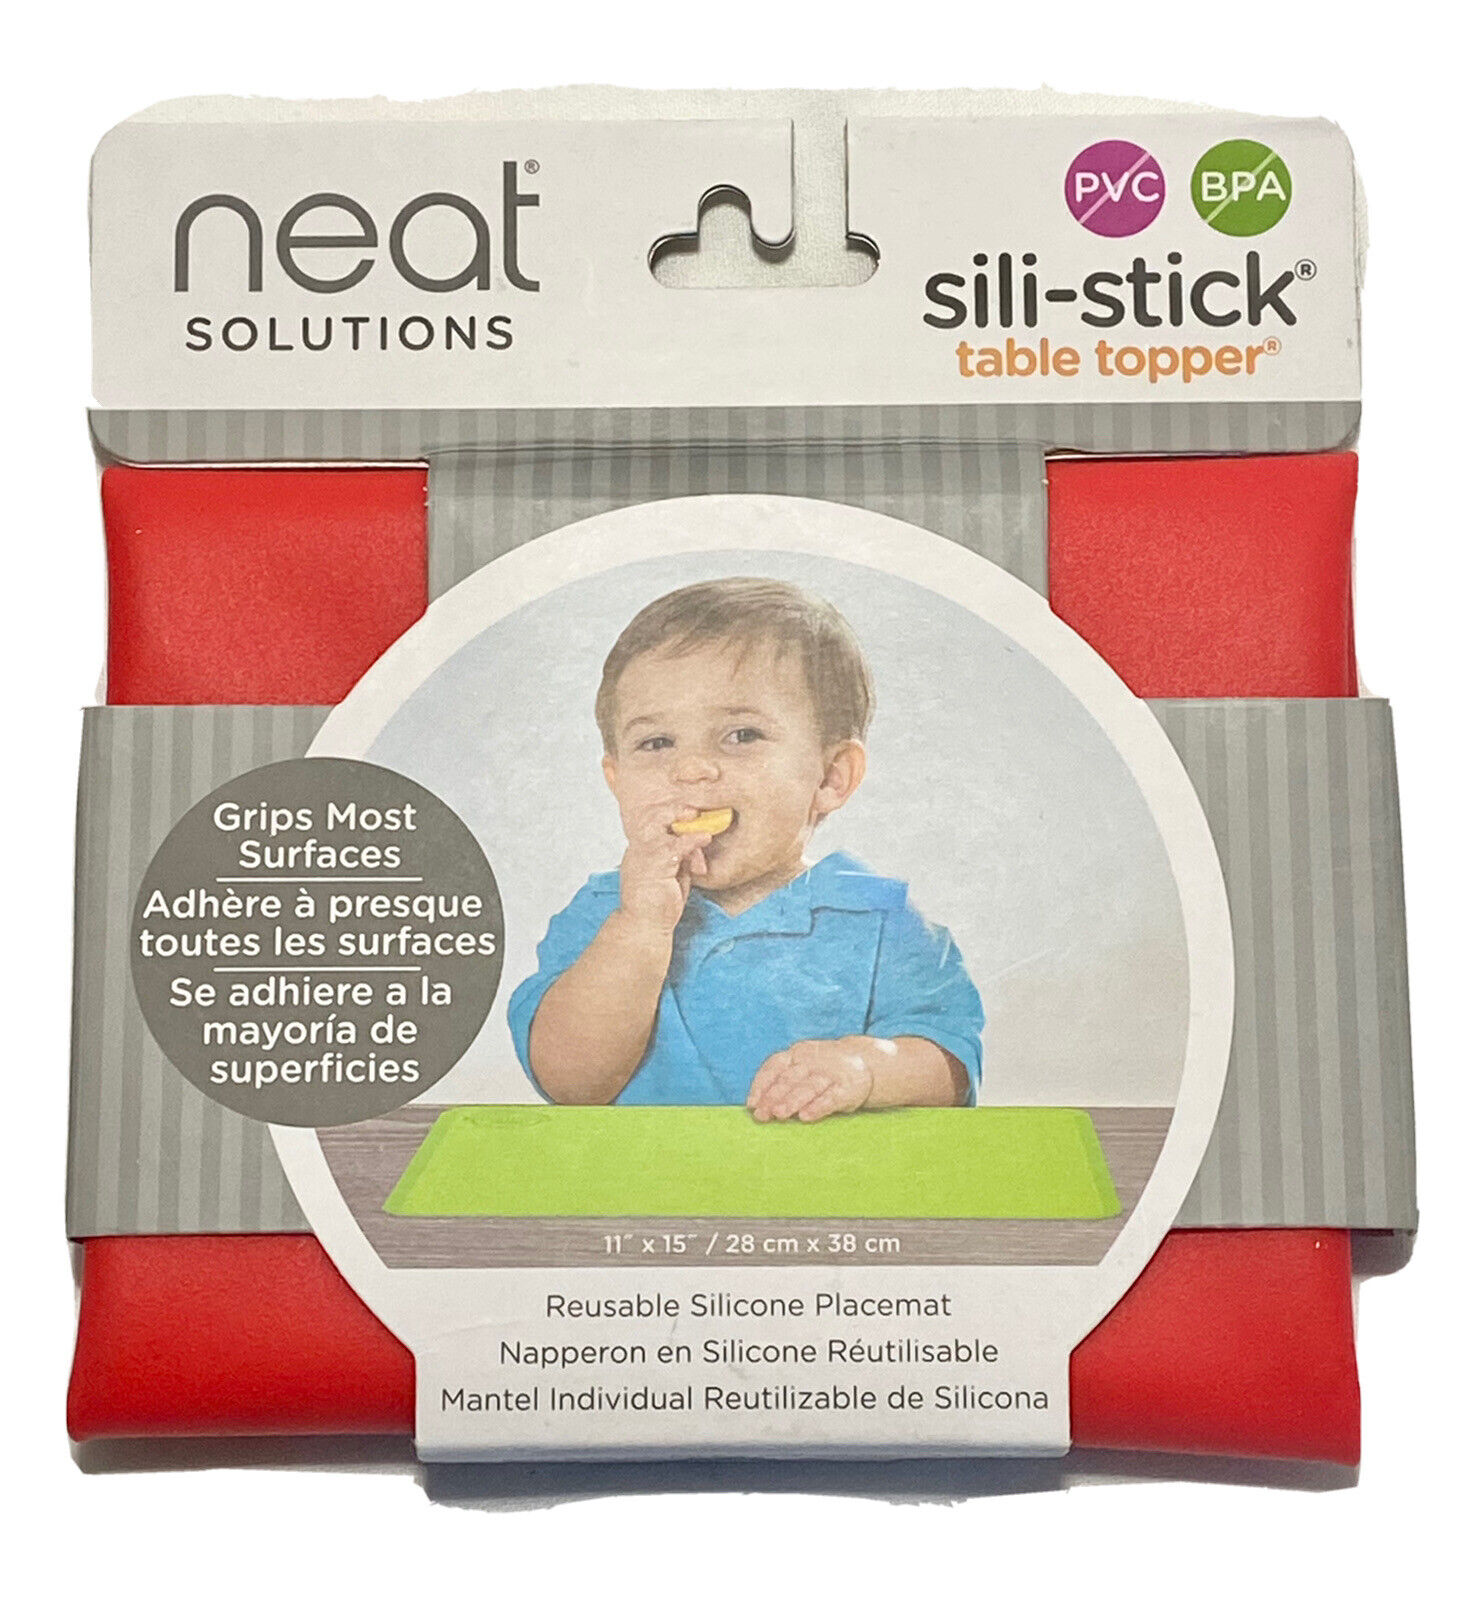 Neat Solutions, Reusable, Kids Silicone Placemat, 11"x15" Red